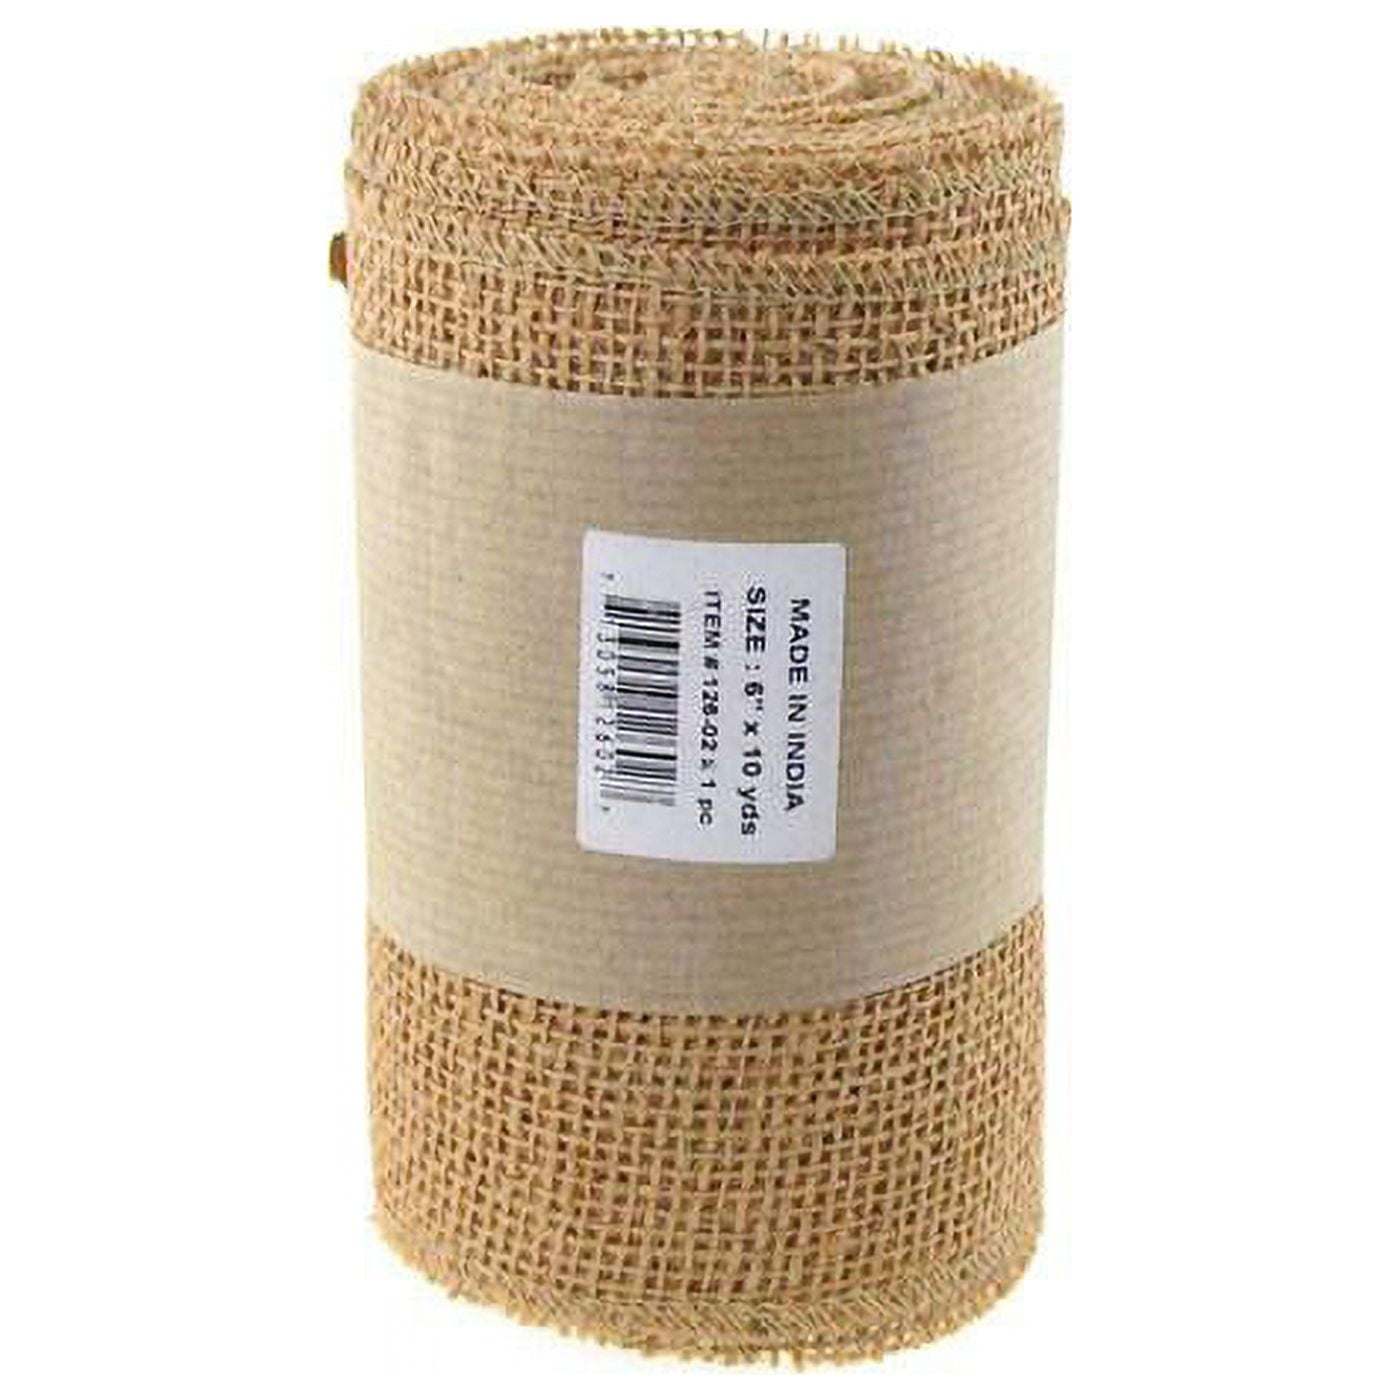 200 Yards Tulle Ribbon Rolls Netting Fabric Spools 6 Olive Green for Christmas  Wrapping Wedding DIY 